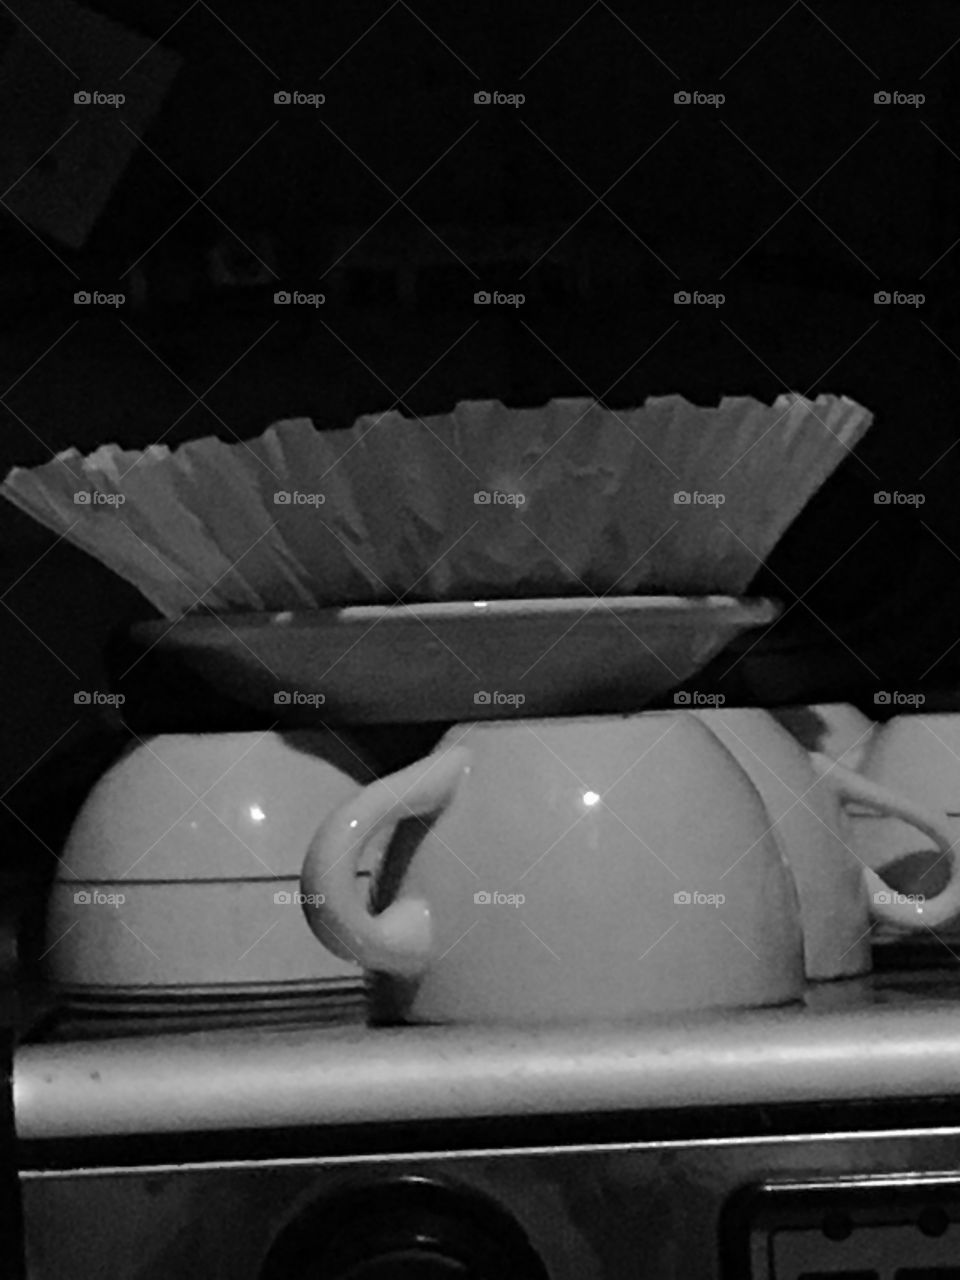 BW upside down coffee cups topped with large paper coffee filter on top of commercial espresso machine